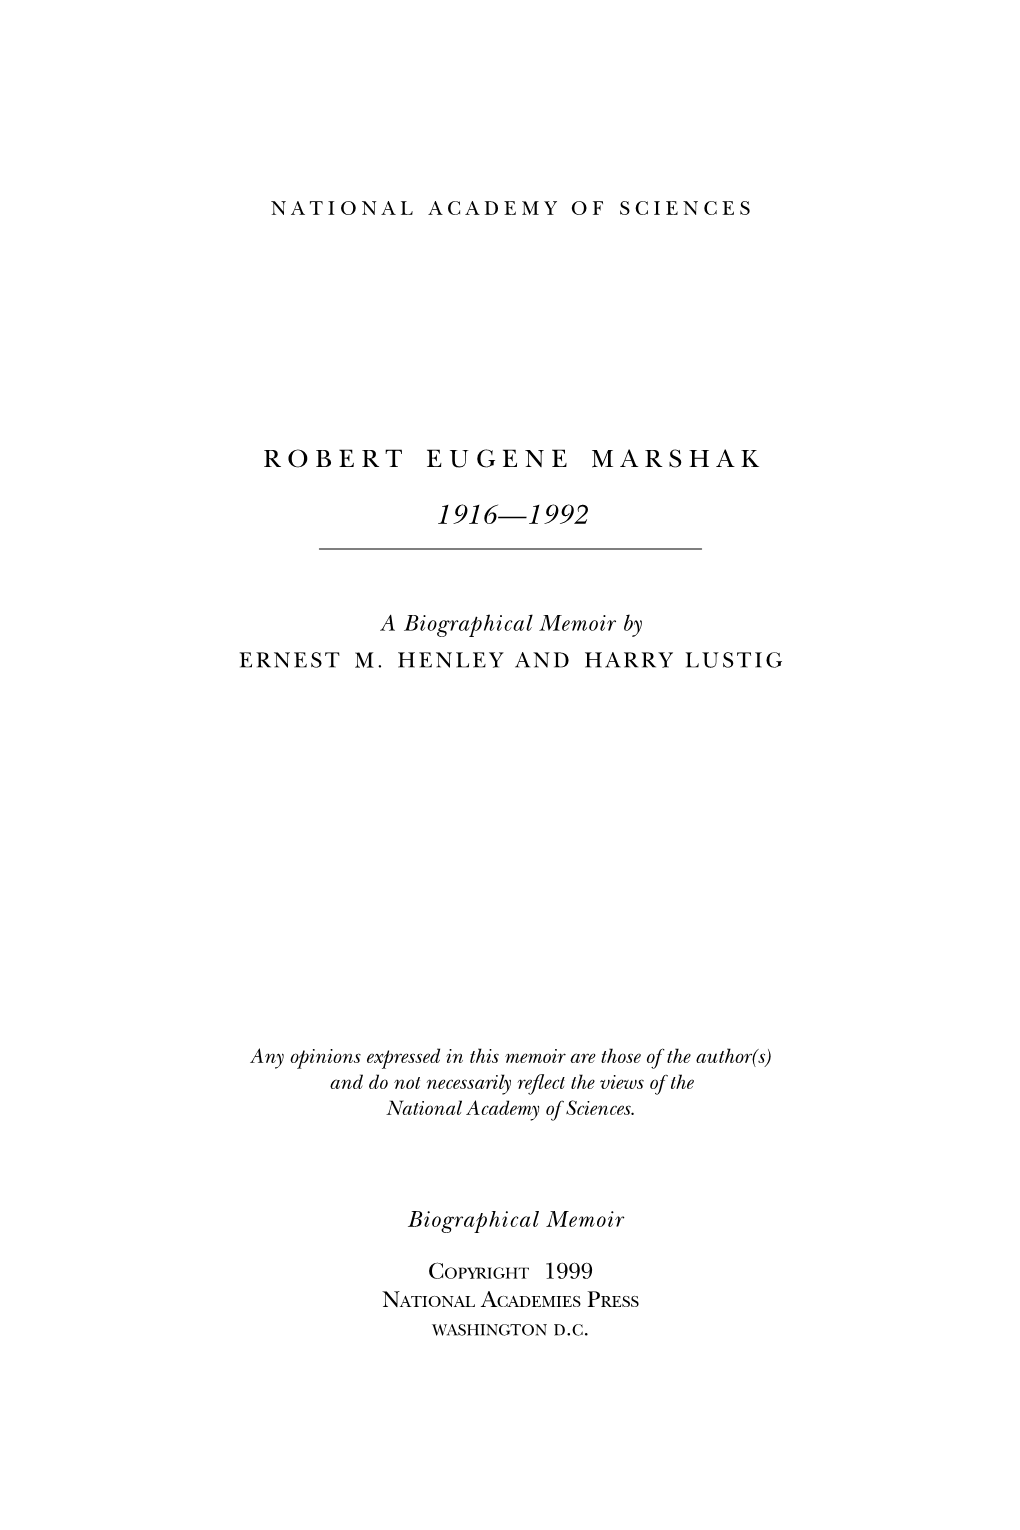 Robert Marshak Could Have Finished His Career There in a Secure And, from a Professional Viewpoint, an Ideal Posi- Tion